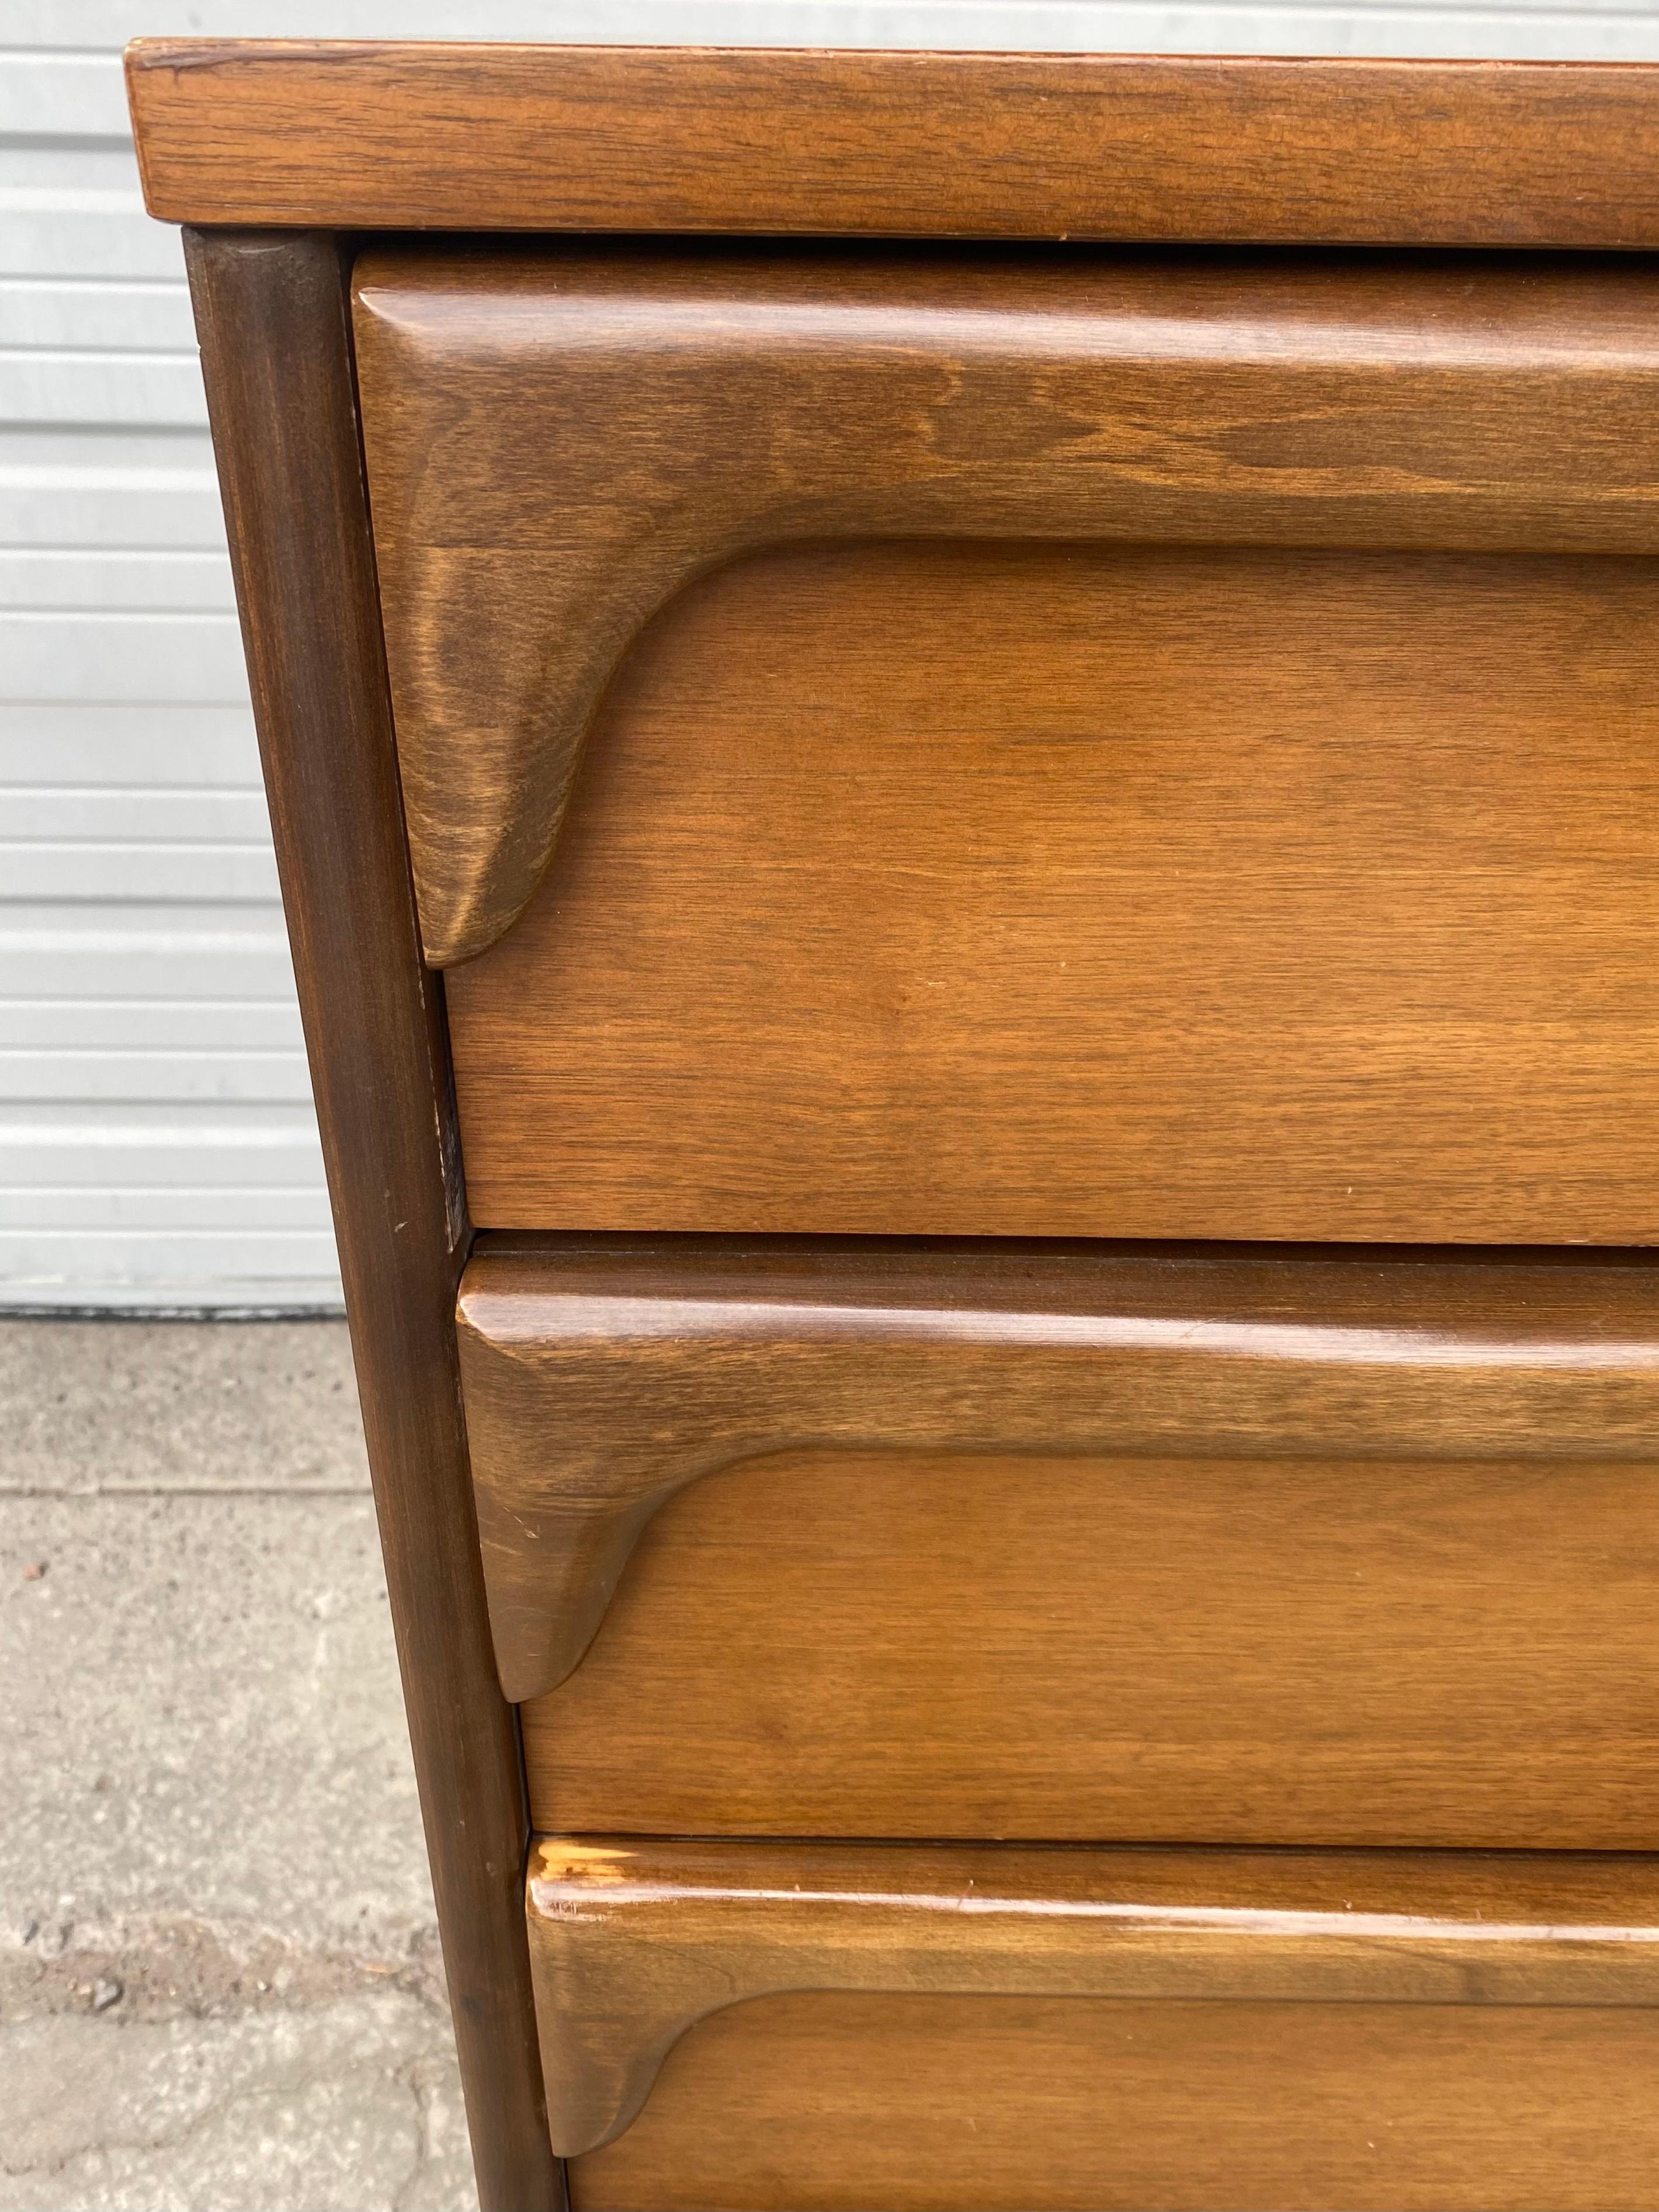 Classic Mid-Century Modern 5-Drawer Chest, Sculptural Walnut by Bassett  In Good Condition For Sale In Buffalo, NY